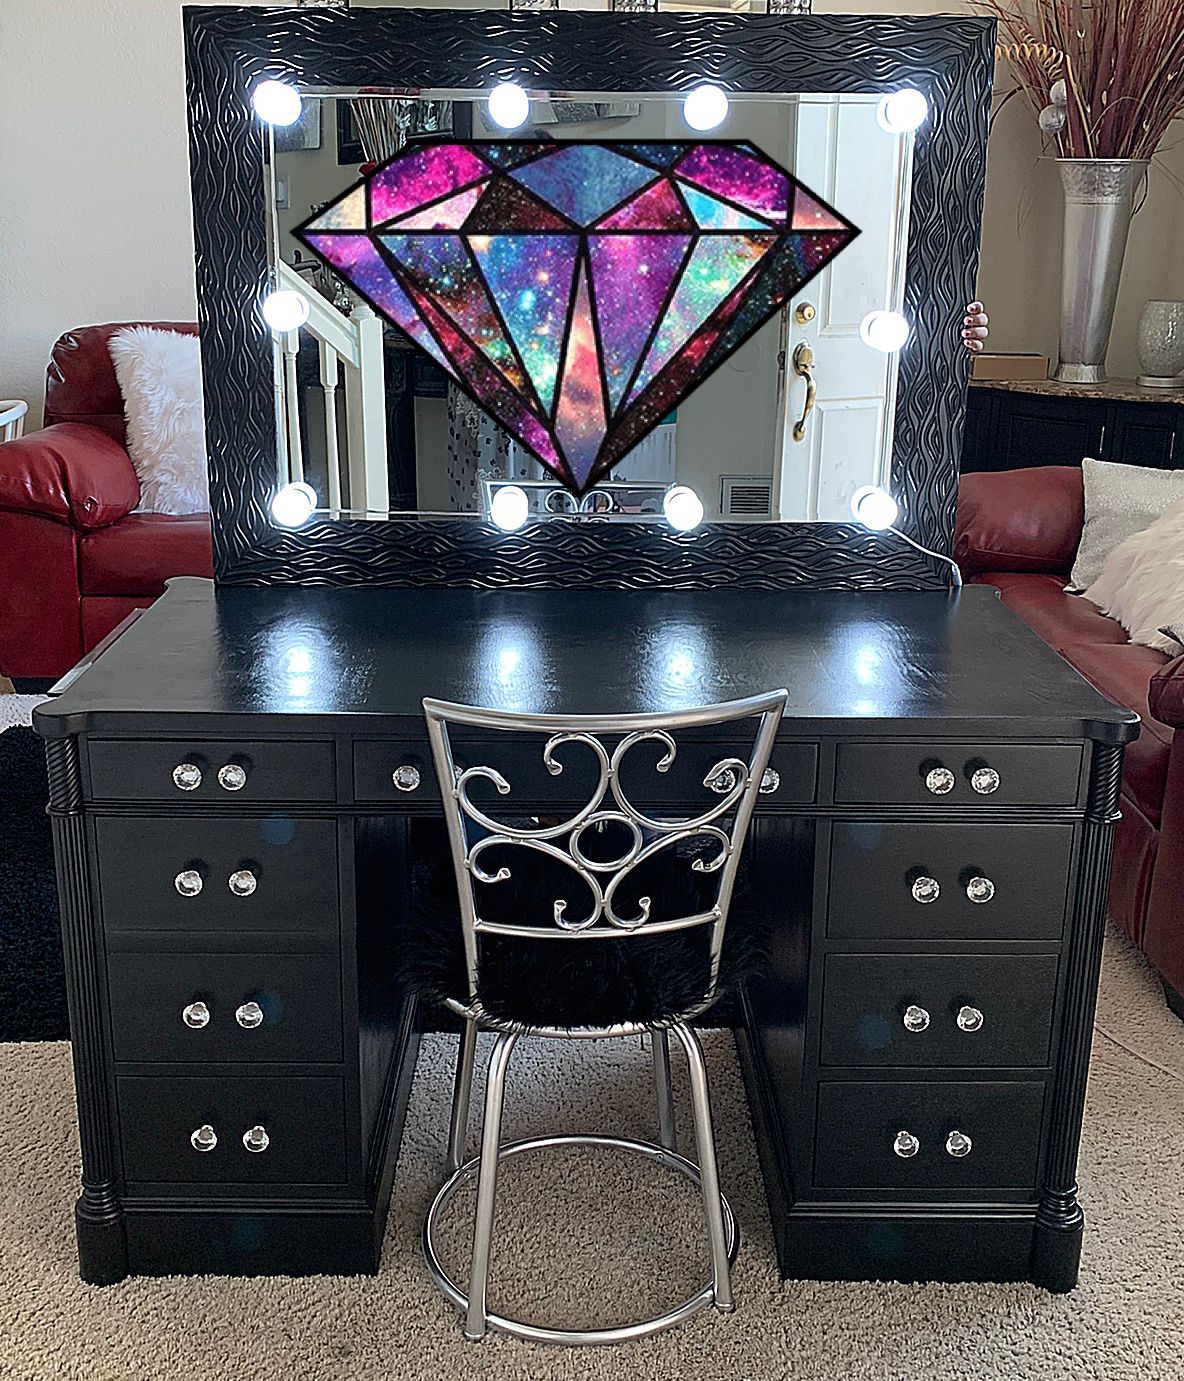 Big beautiful black makeup vanity sets with led light up mirror and chair 👀👀🔥🔥🤗